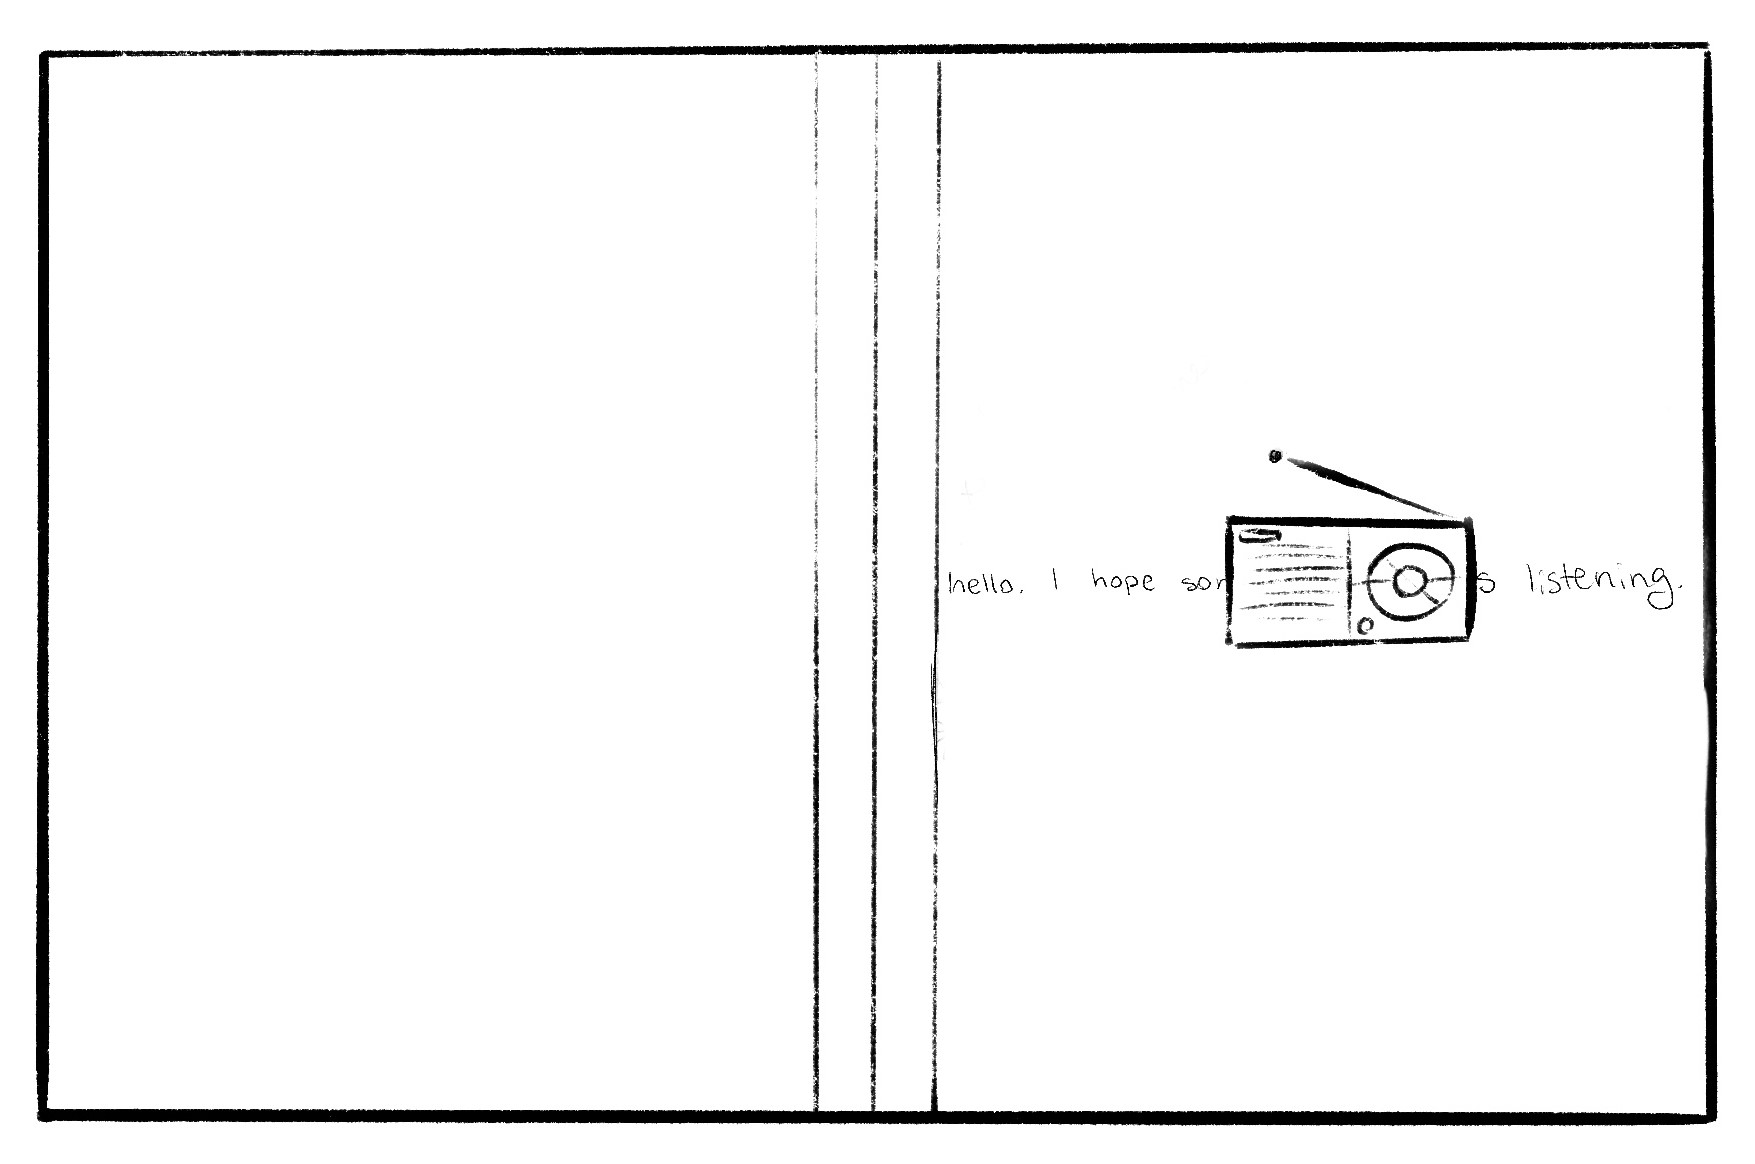 Radio silence case design sketch. There is a radio at the center with a short line of text behind it reading 'hello. I hope someone is listening.'